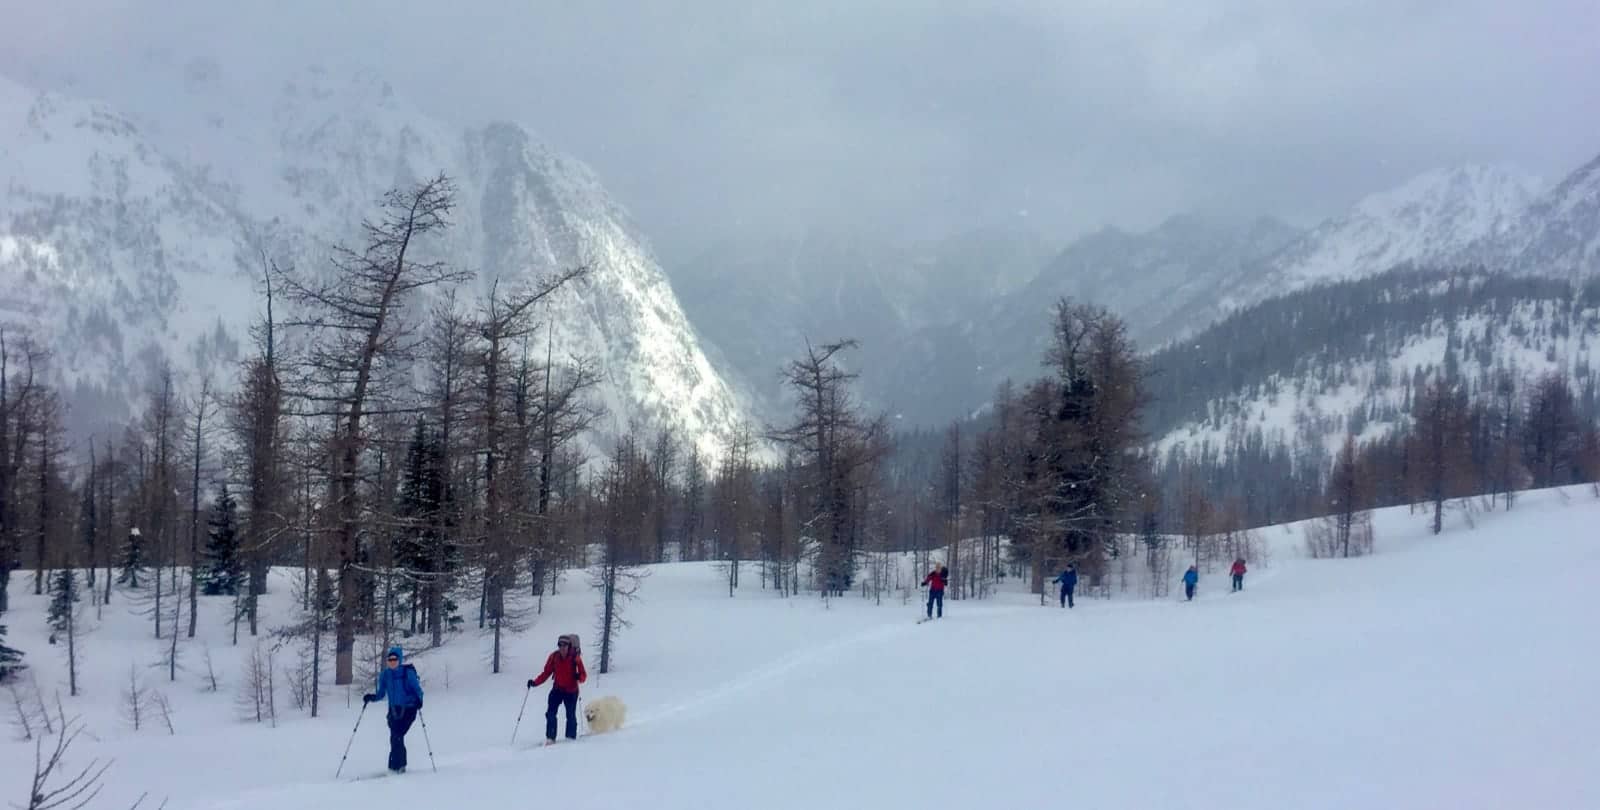 People cross country skiing in rugged mountains